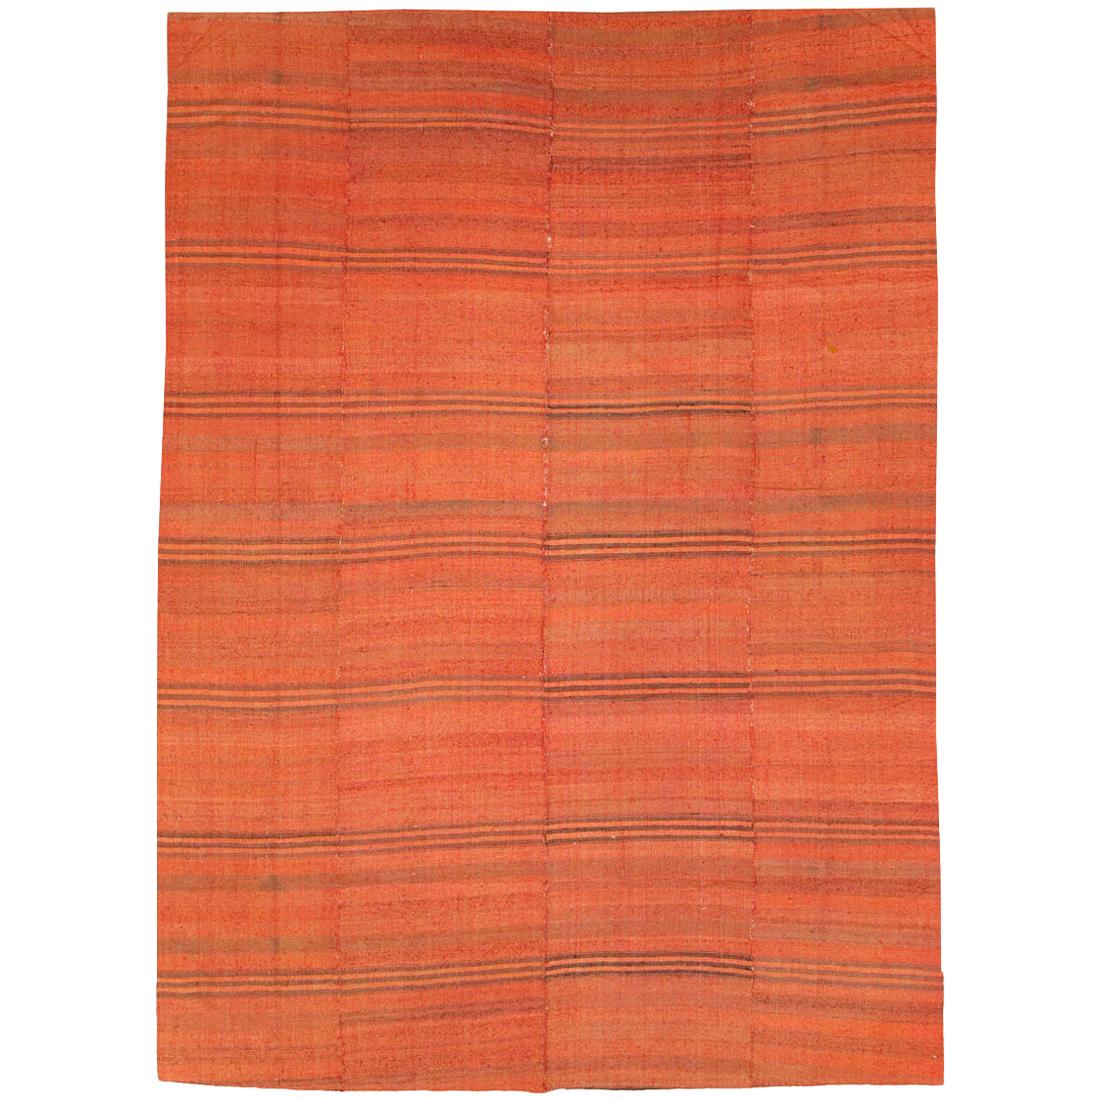 Mid-20th Century Turkish Flat-Weave Kilim Small Room Size Carpet in Red Orange For Sale